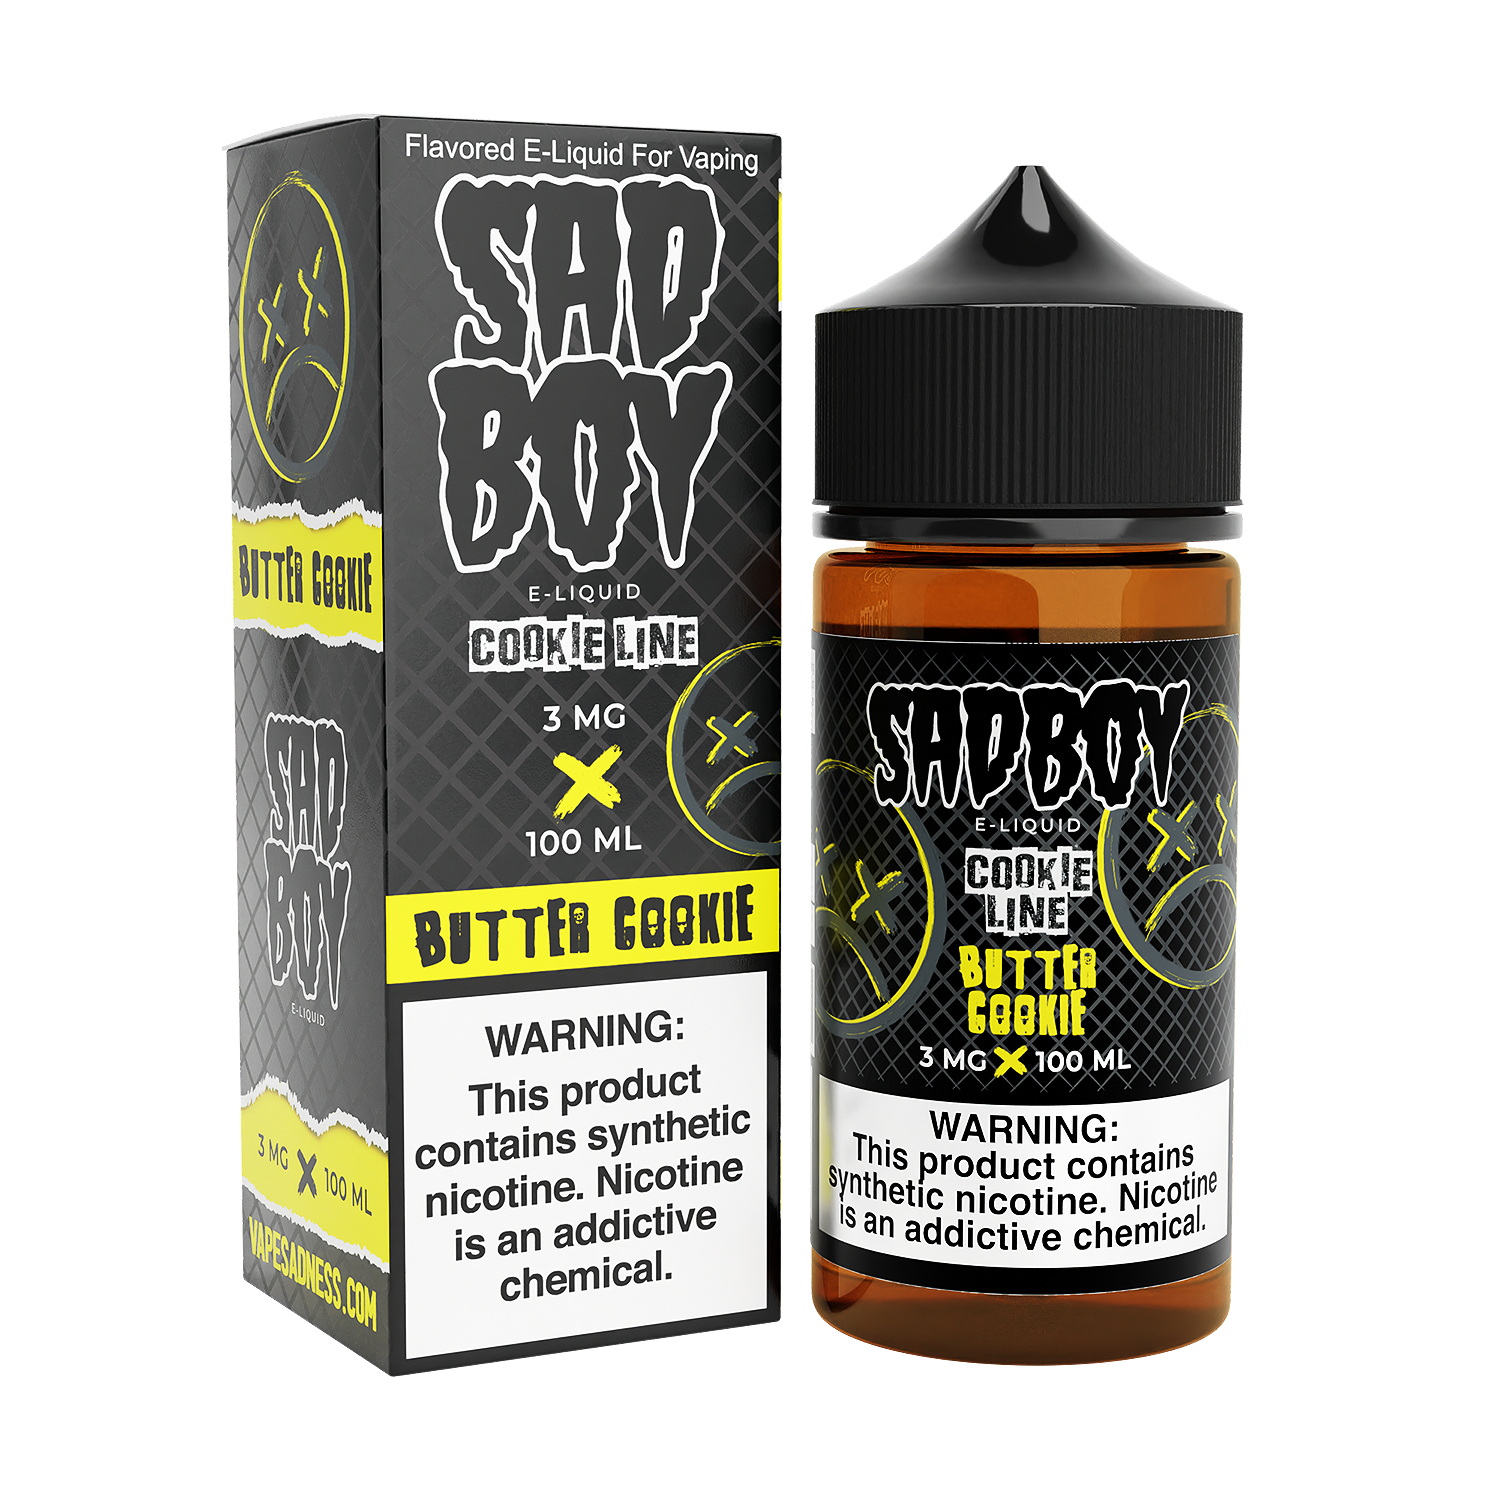 Butter Cookie by Sadboy Series 100mL with Packaging